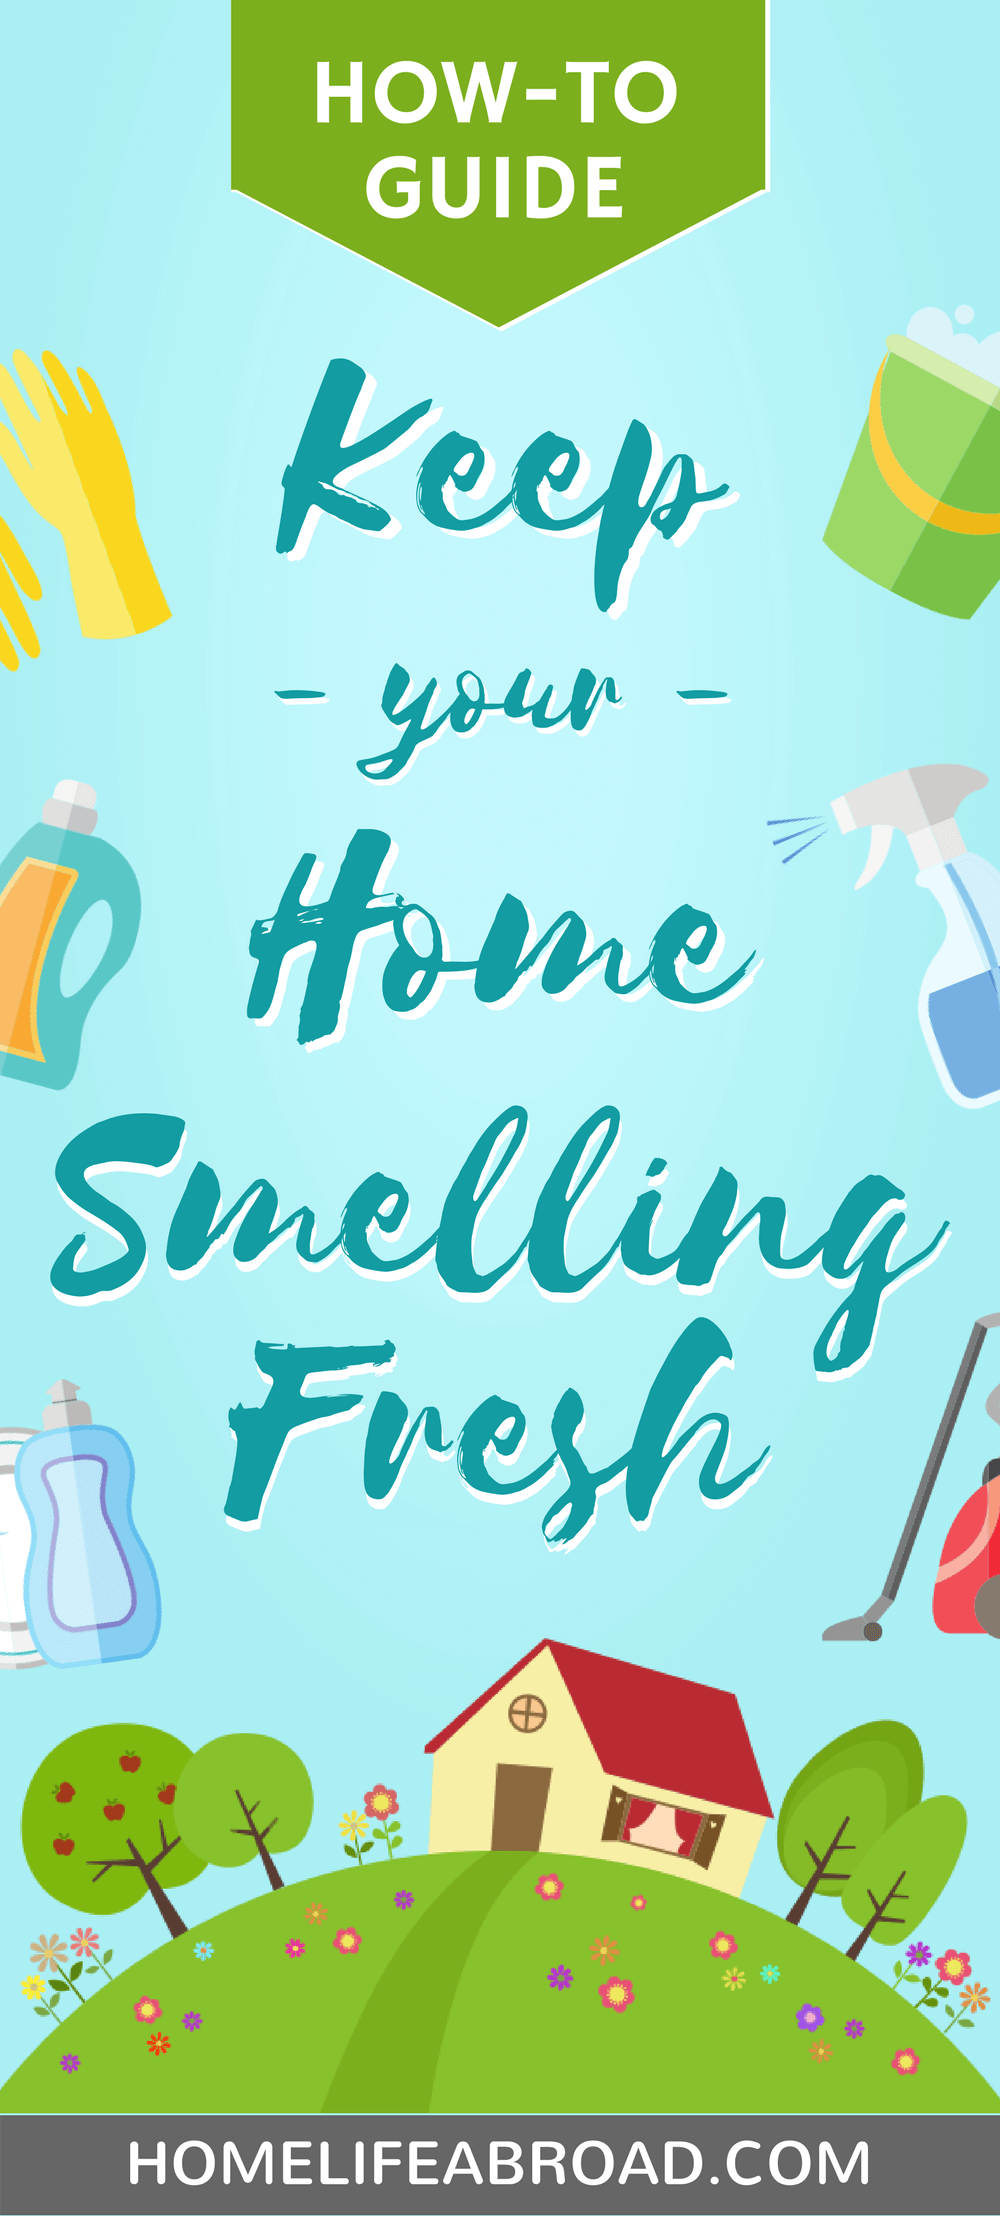 Keep your home smelling fresh with these 5 great tips! @homelifeabroad #cleanhouse #cleaning #home